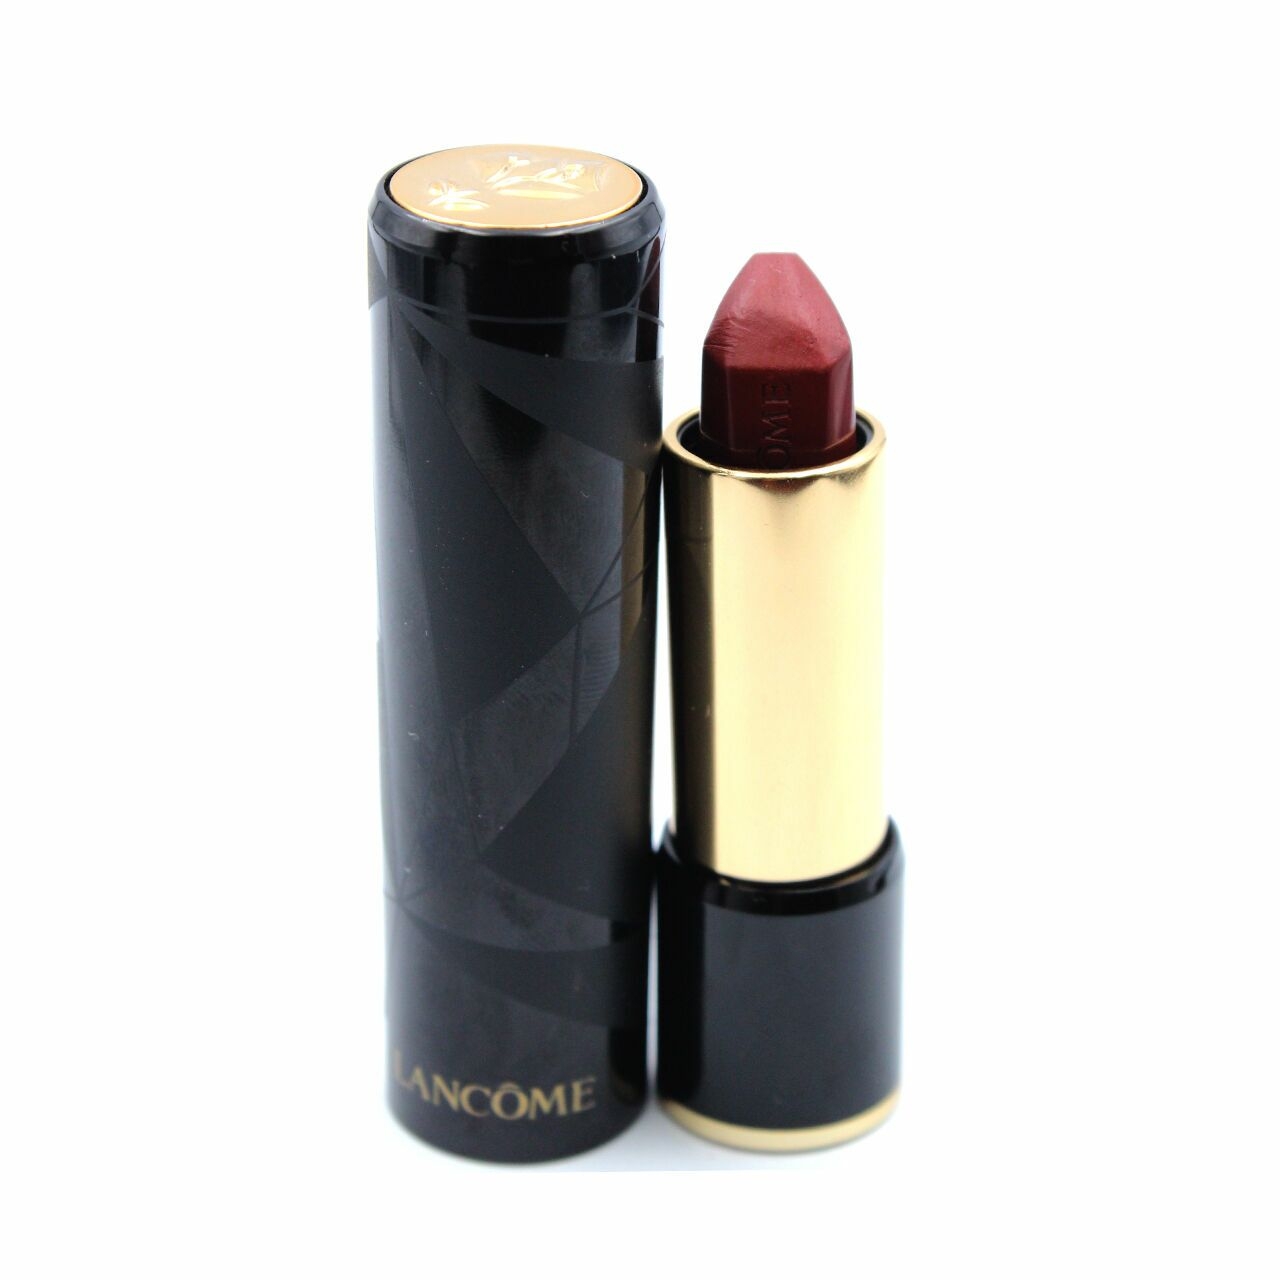 Lancome L'absolu Rouge Ruby Cream Shade 481 Pigeon Blood Ruby